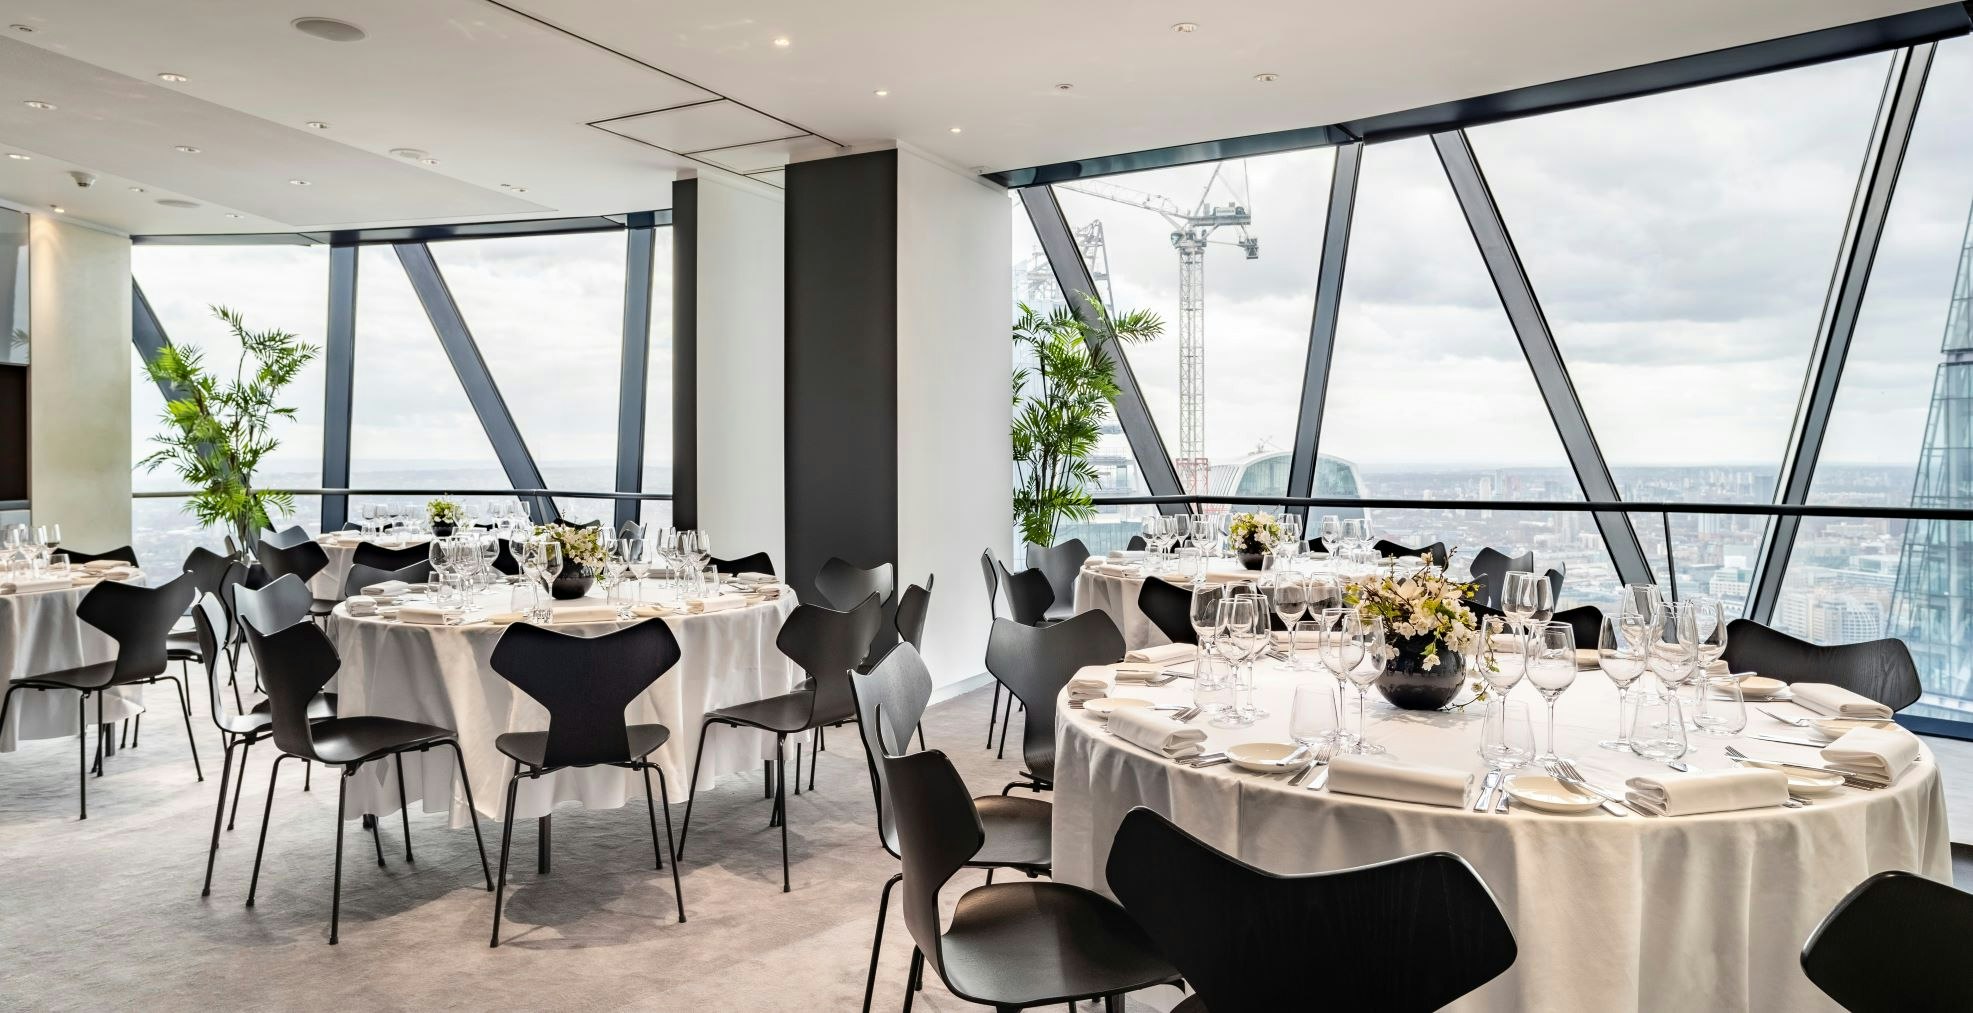 Filming Locations Venues in West London - Searcys at the Gherkin